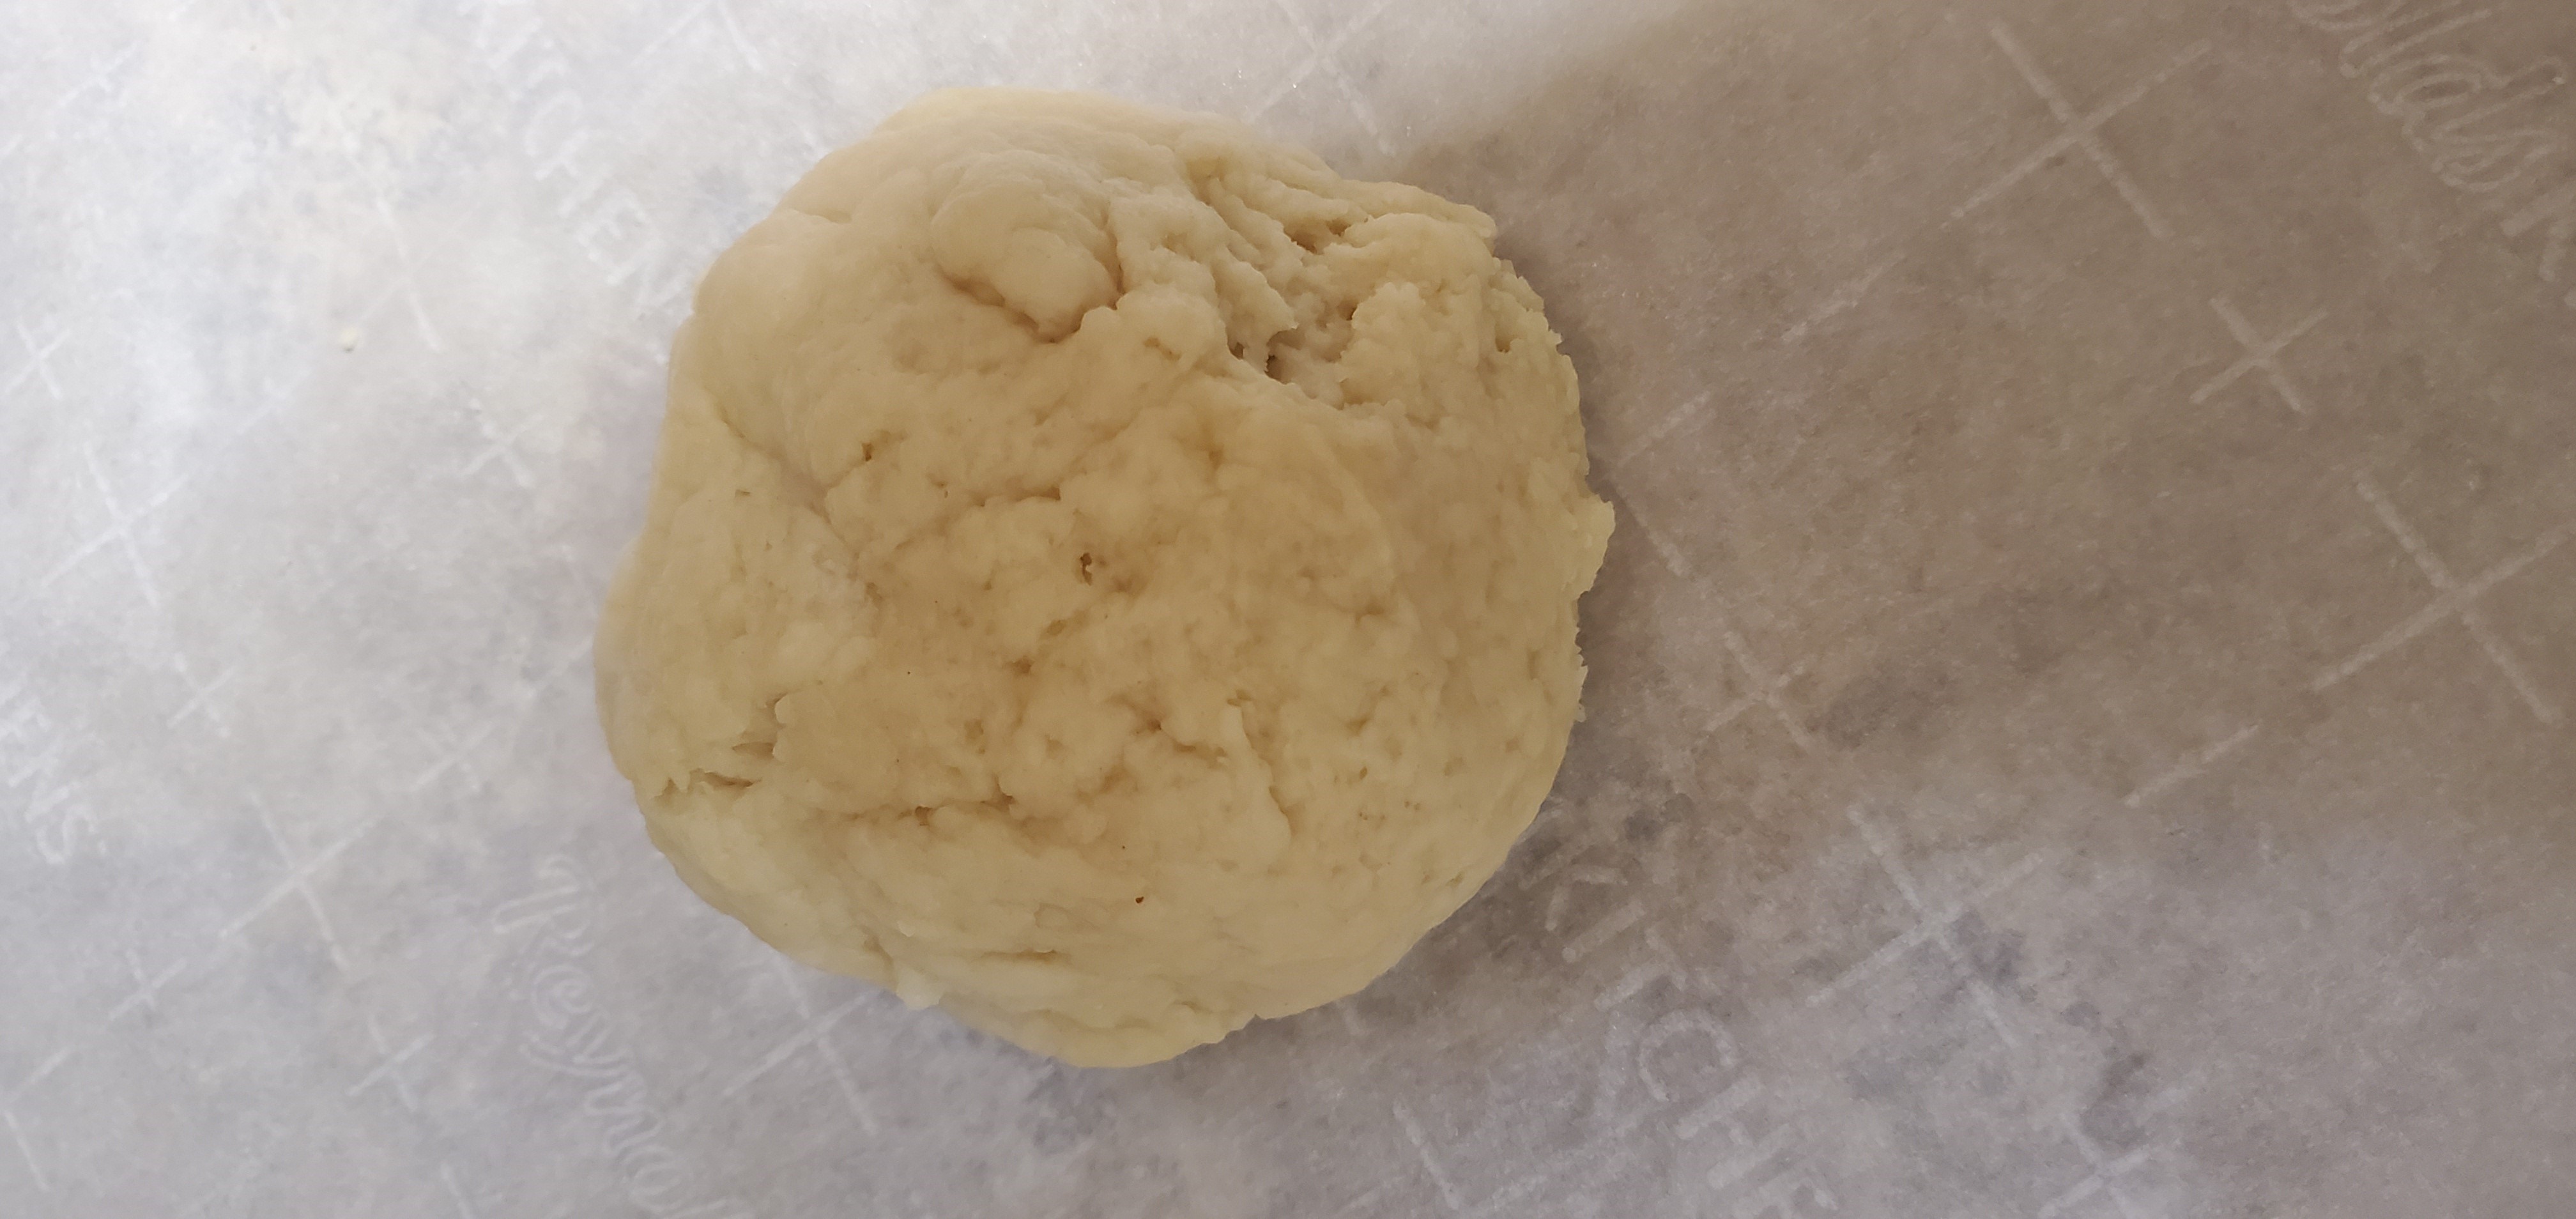 Ball of simple dough ready to form into flat rounds